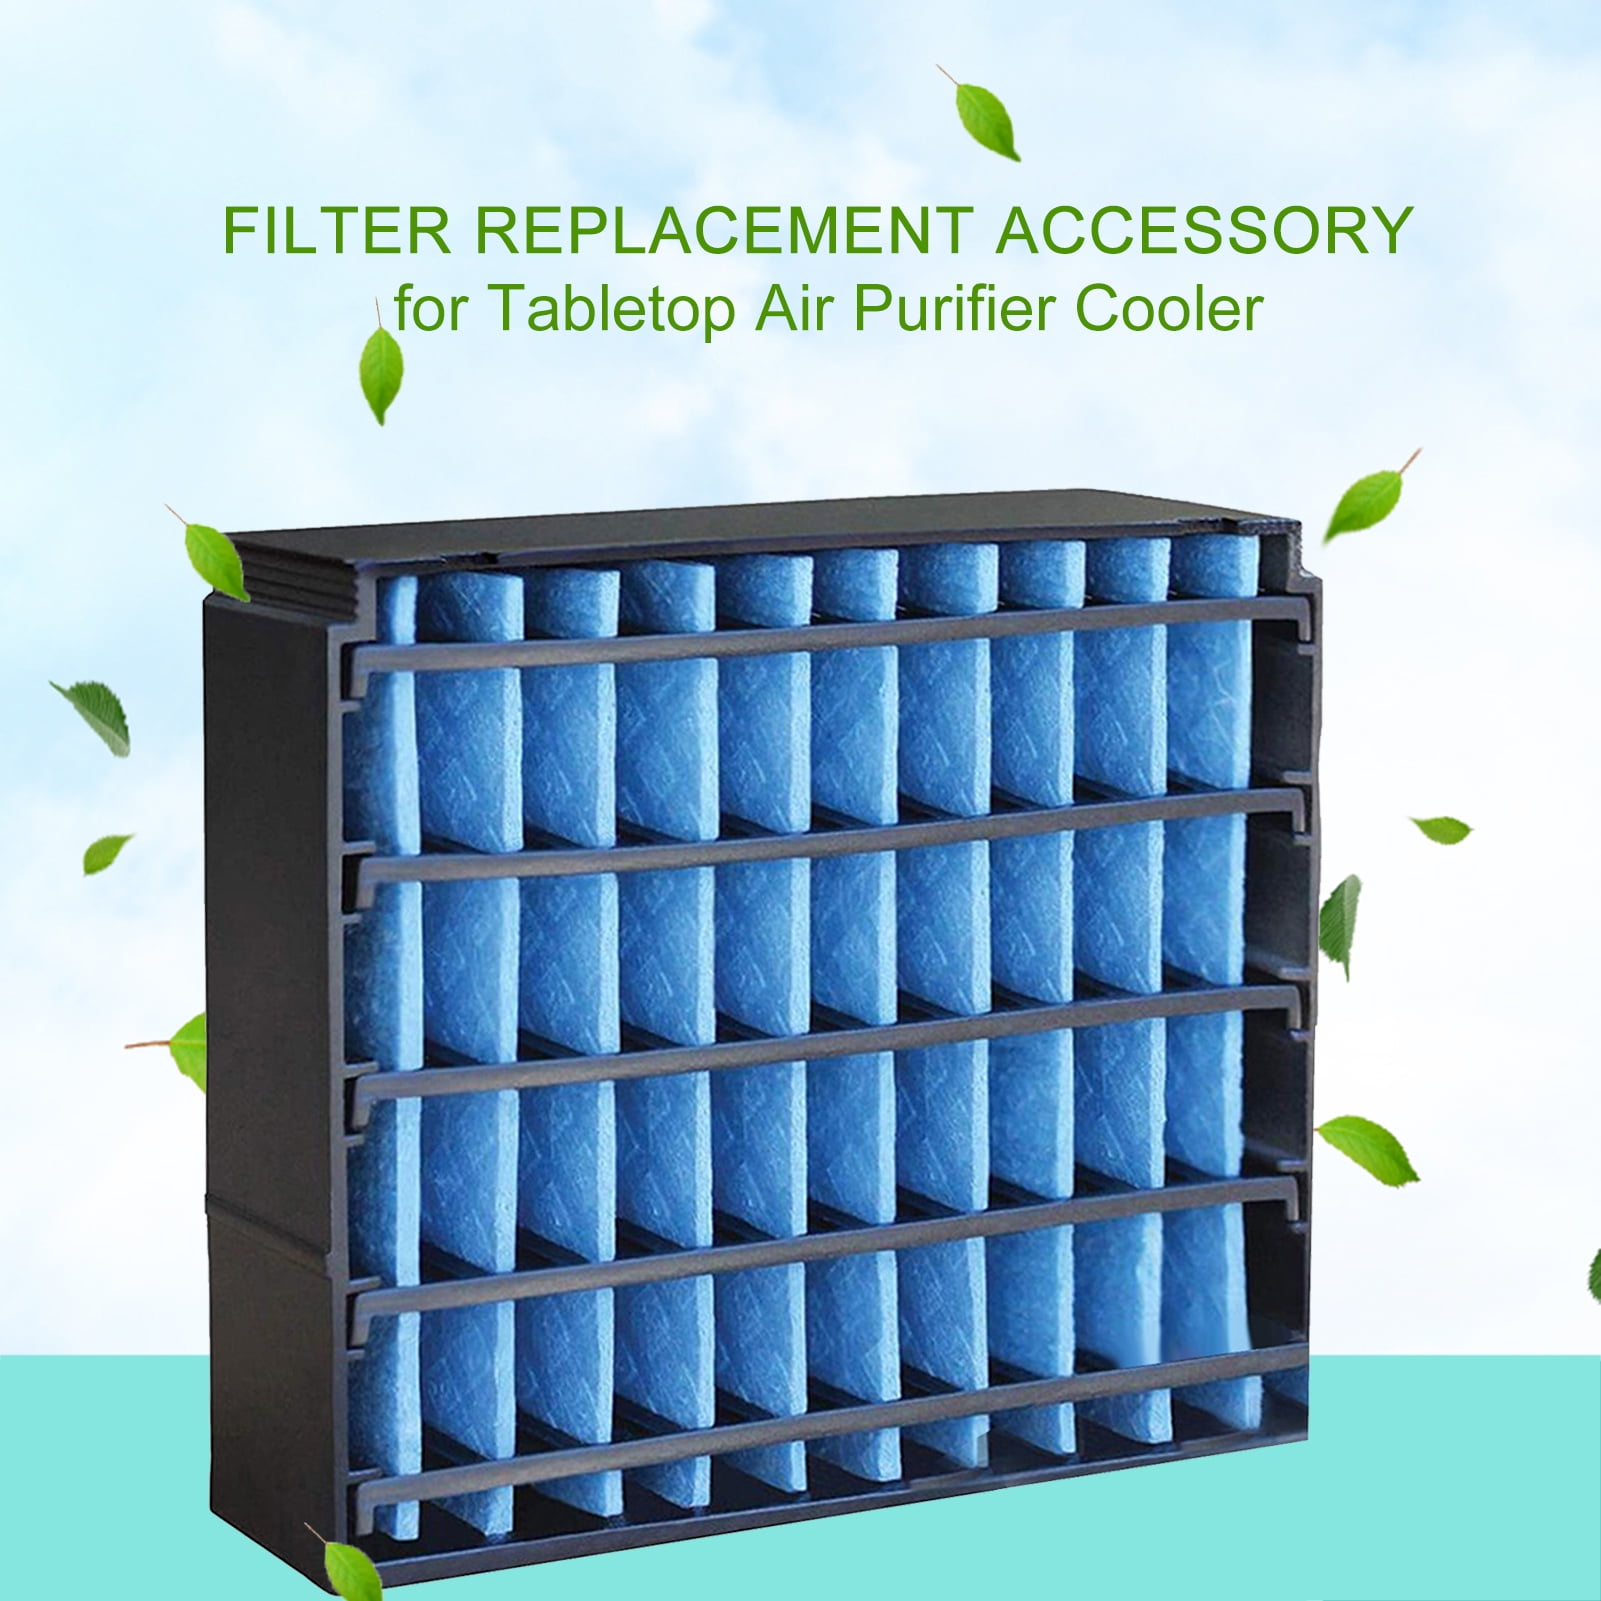 Replacement Accessory for Tabletop Air Purifier Cooler Hongjingda Air Cooler Replacement Filter 